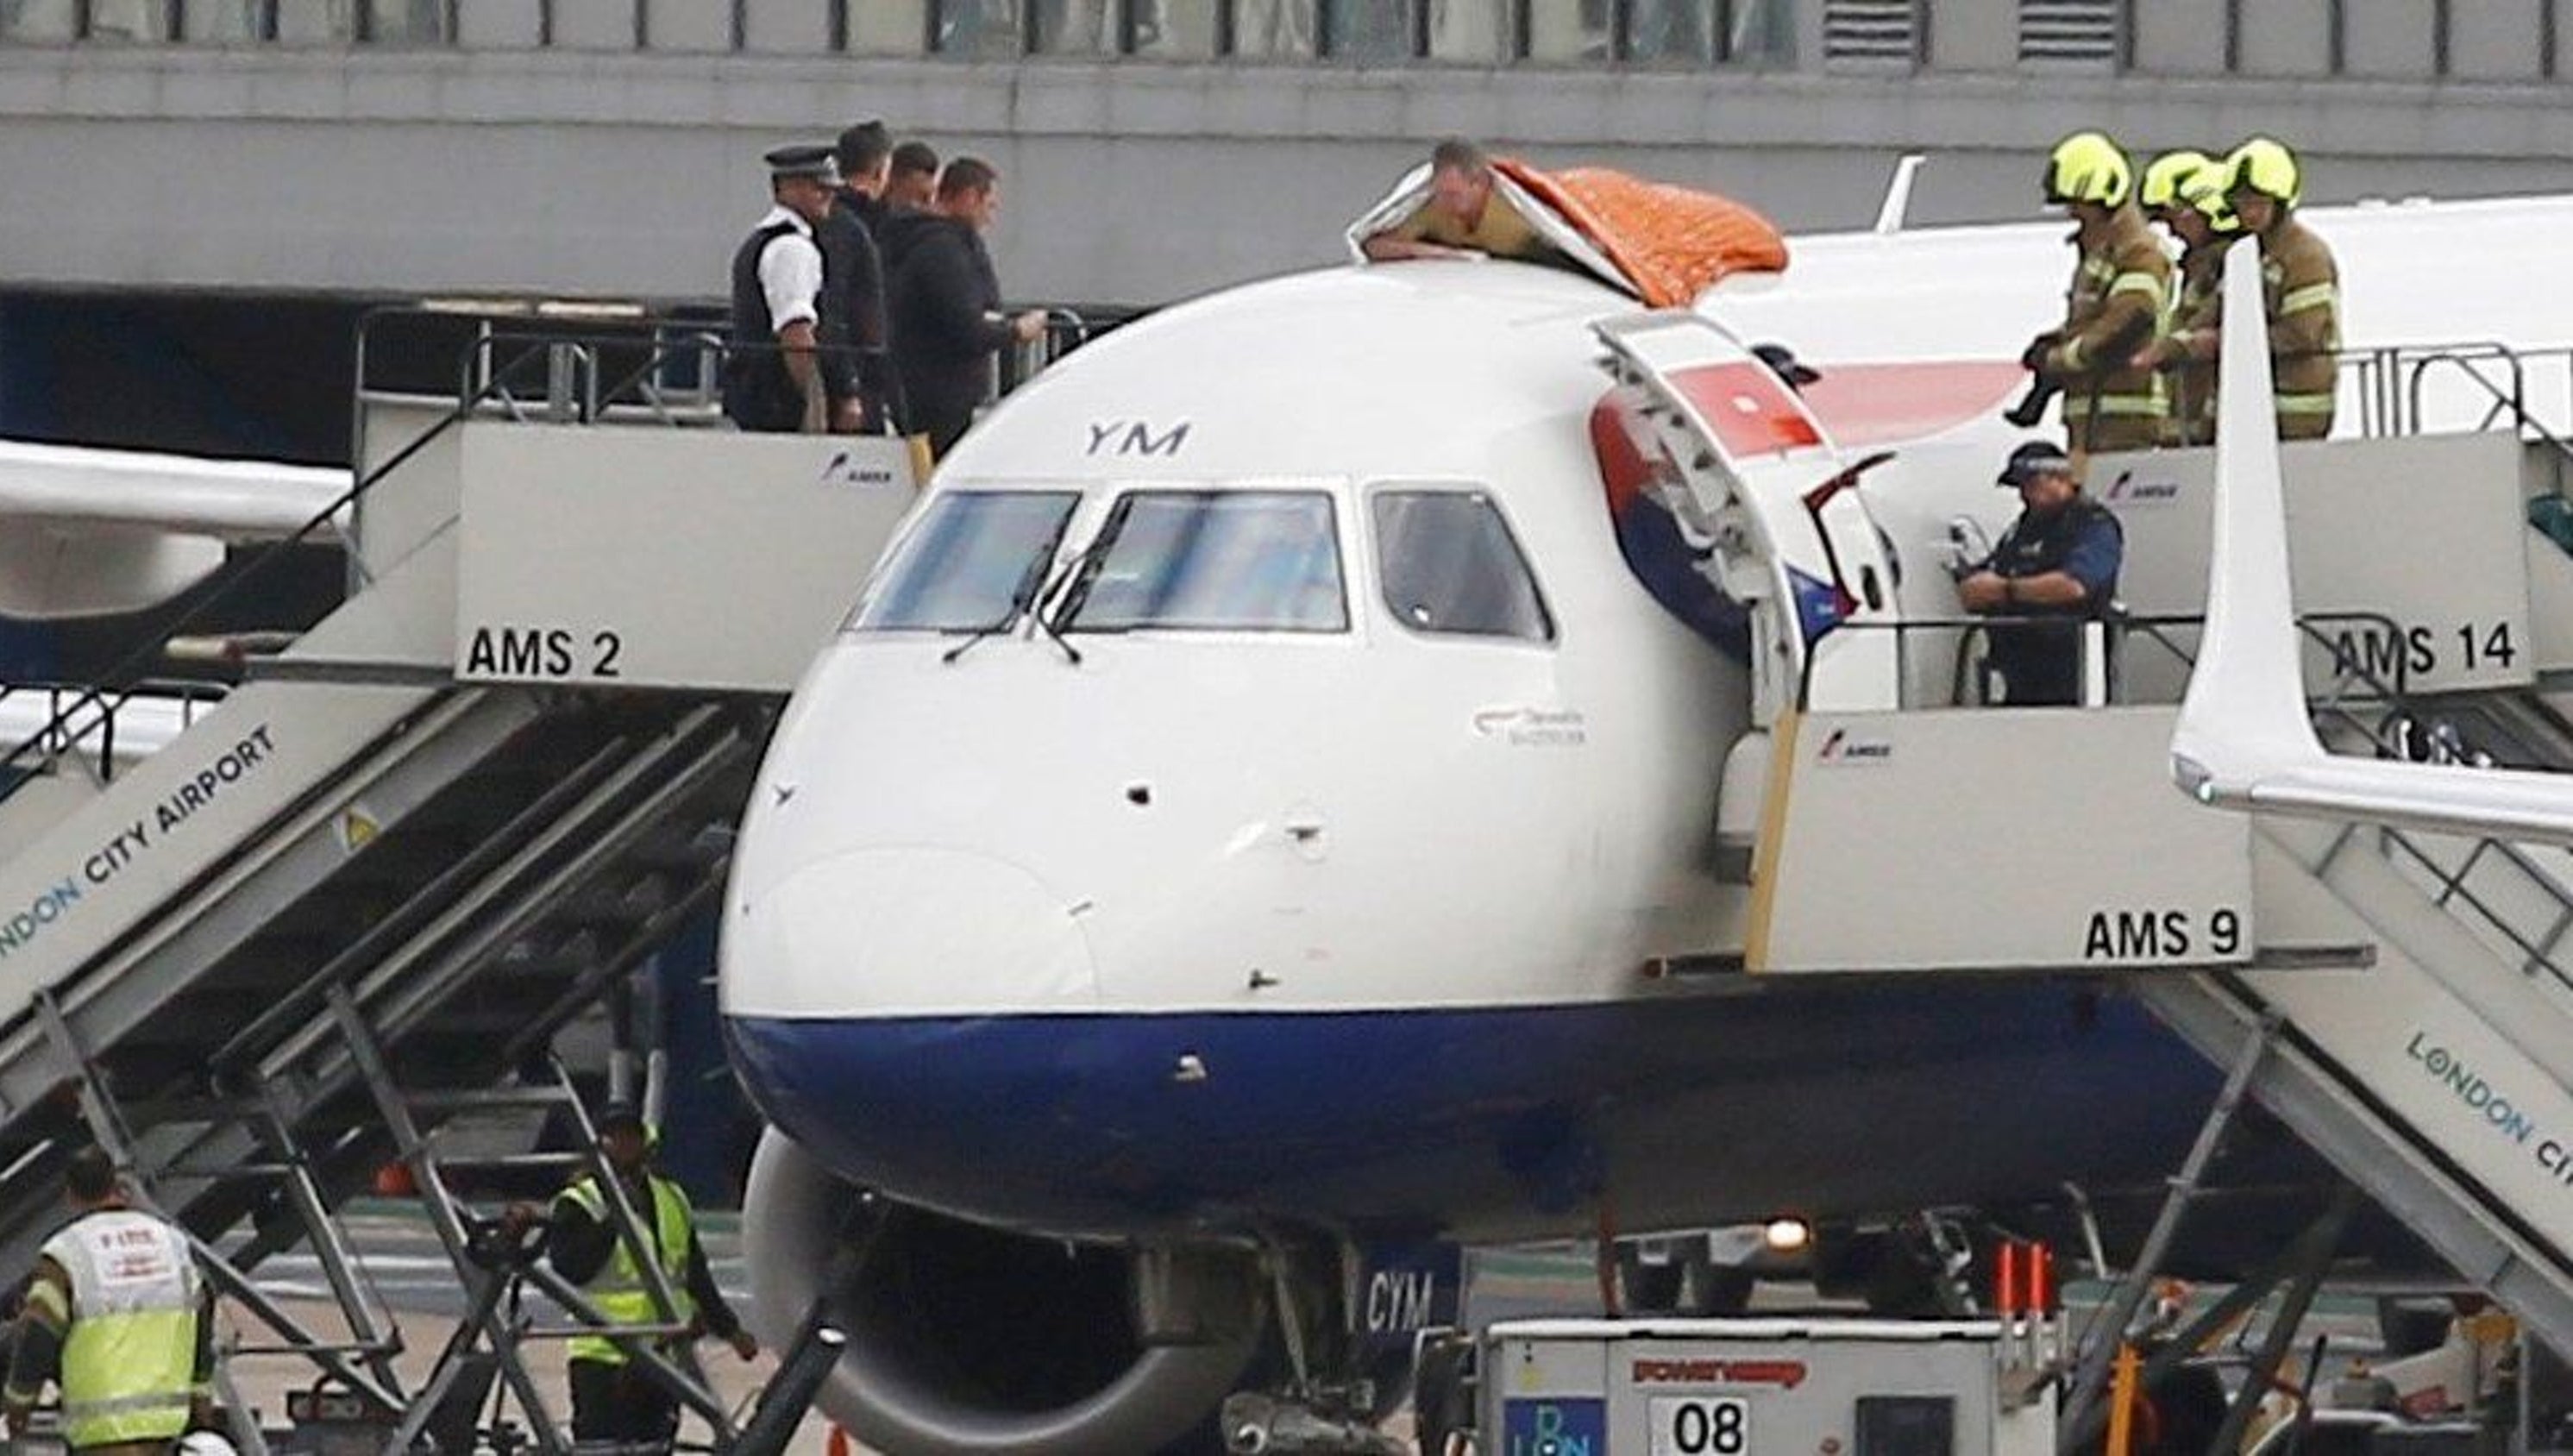 James staged a spectacular climb on top of the fuselage of a British Airways jet at London City Airport in October 2019